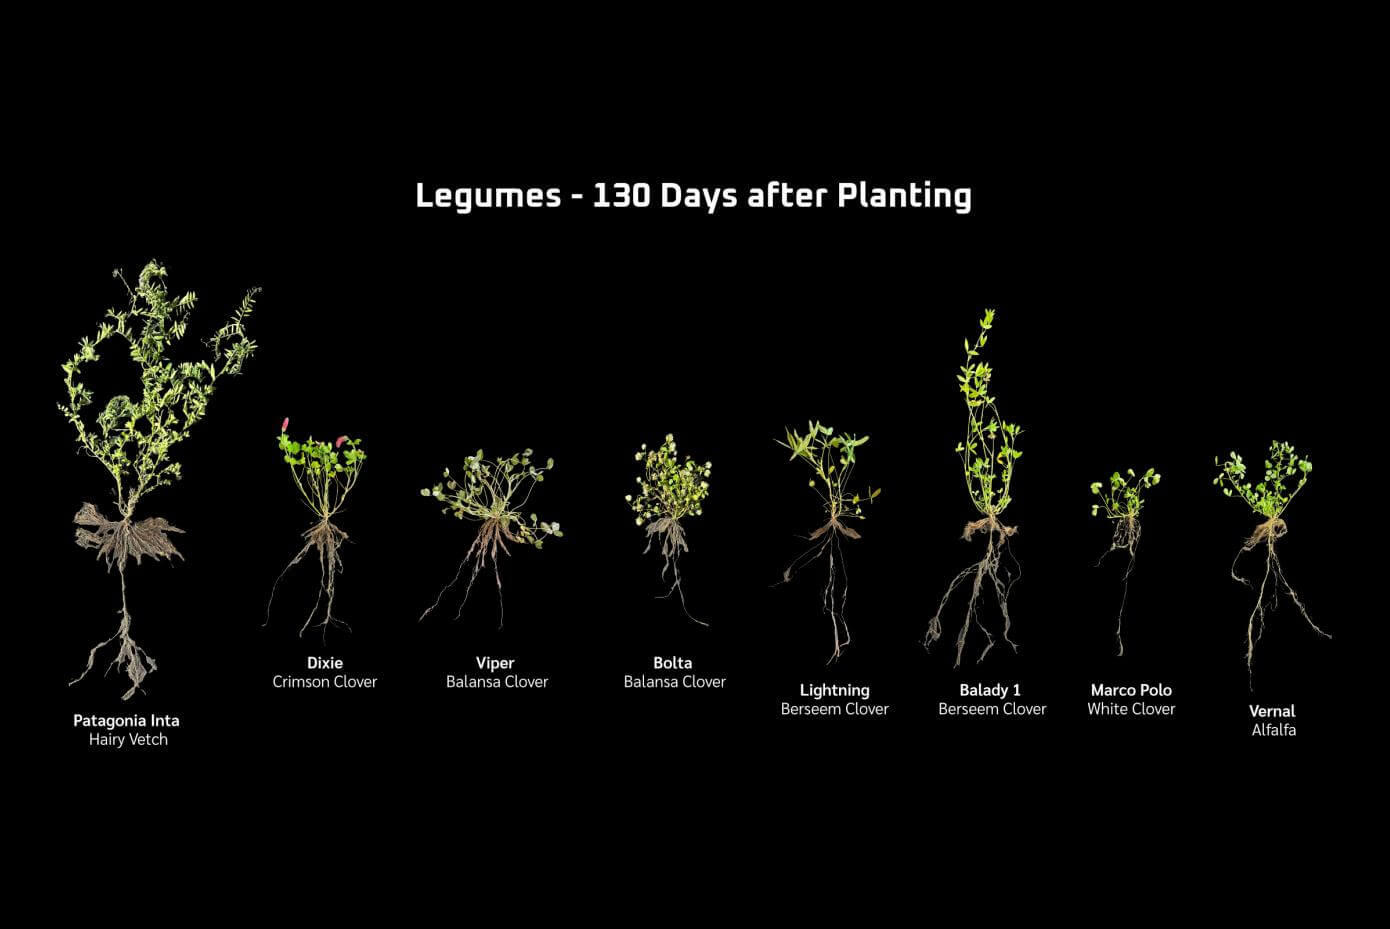 A collage of plants showing top-growth and root structure on a black background.